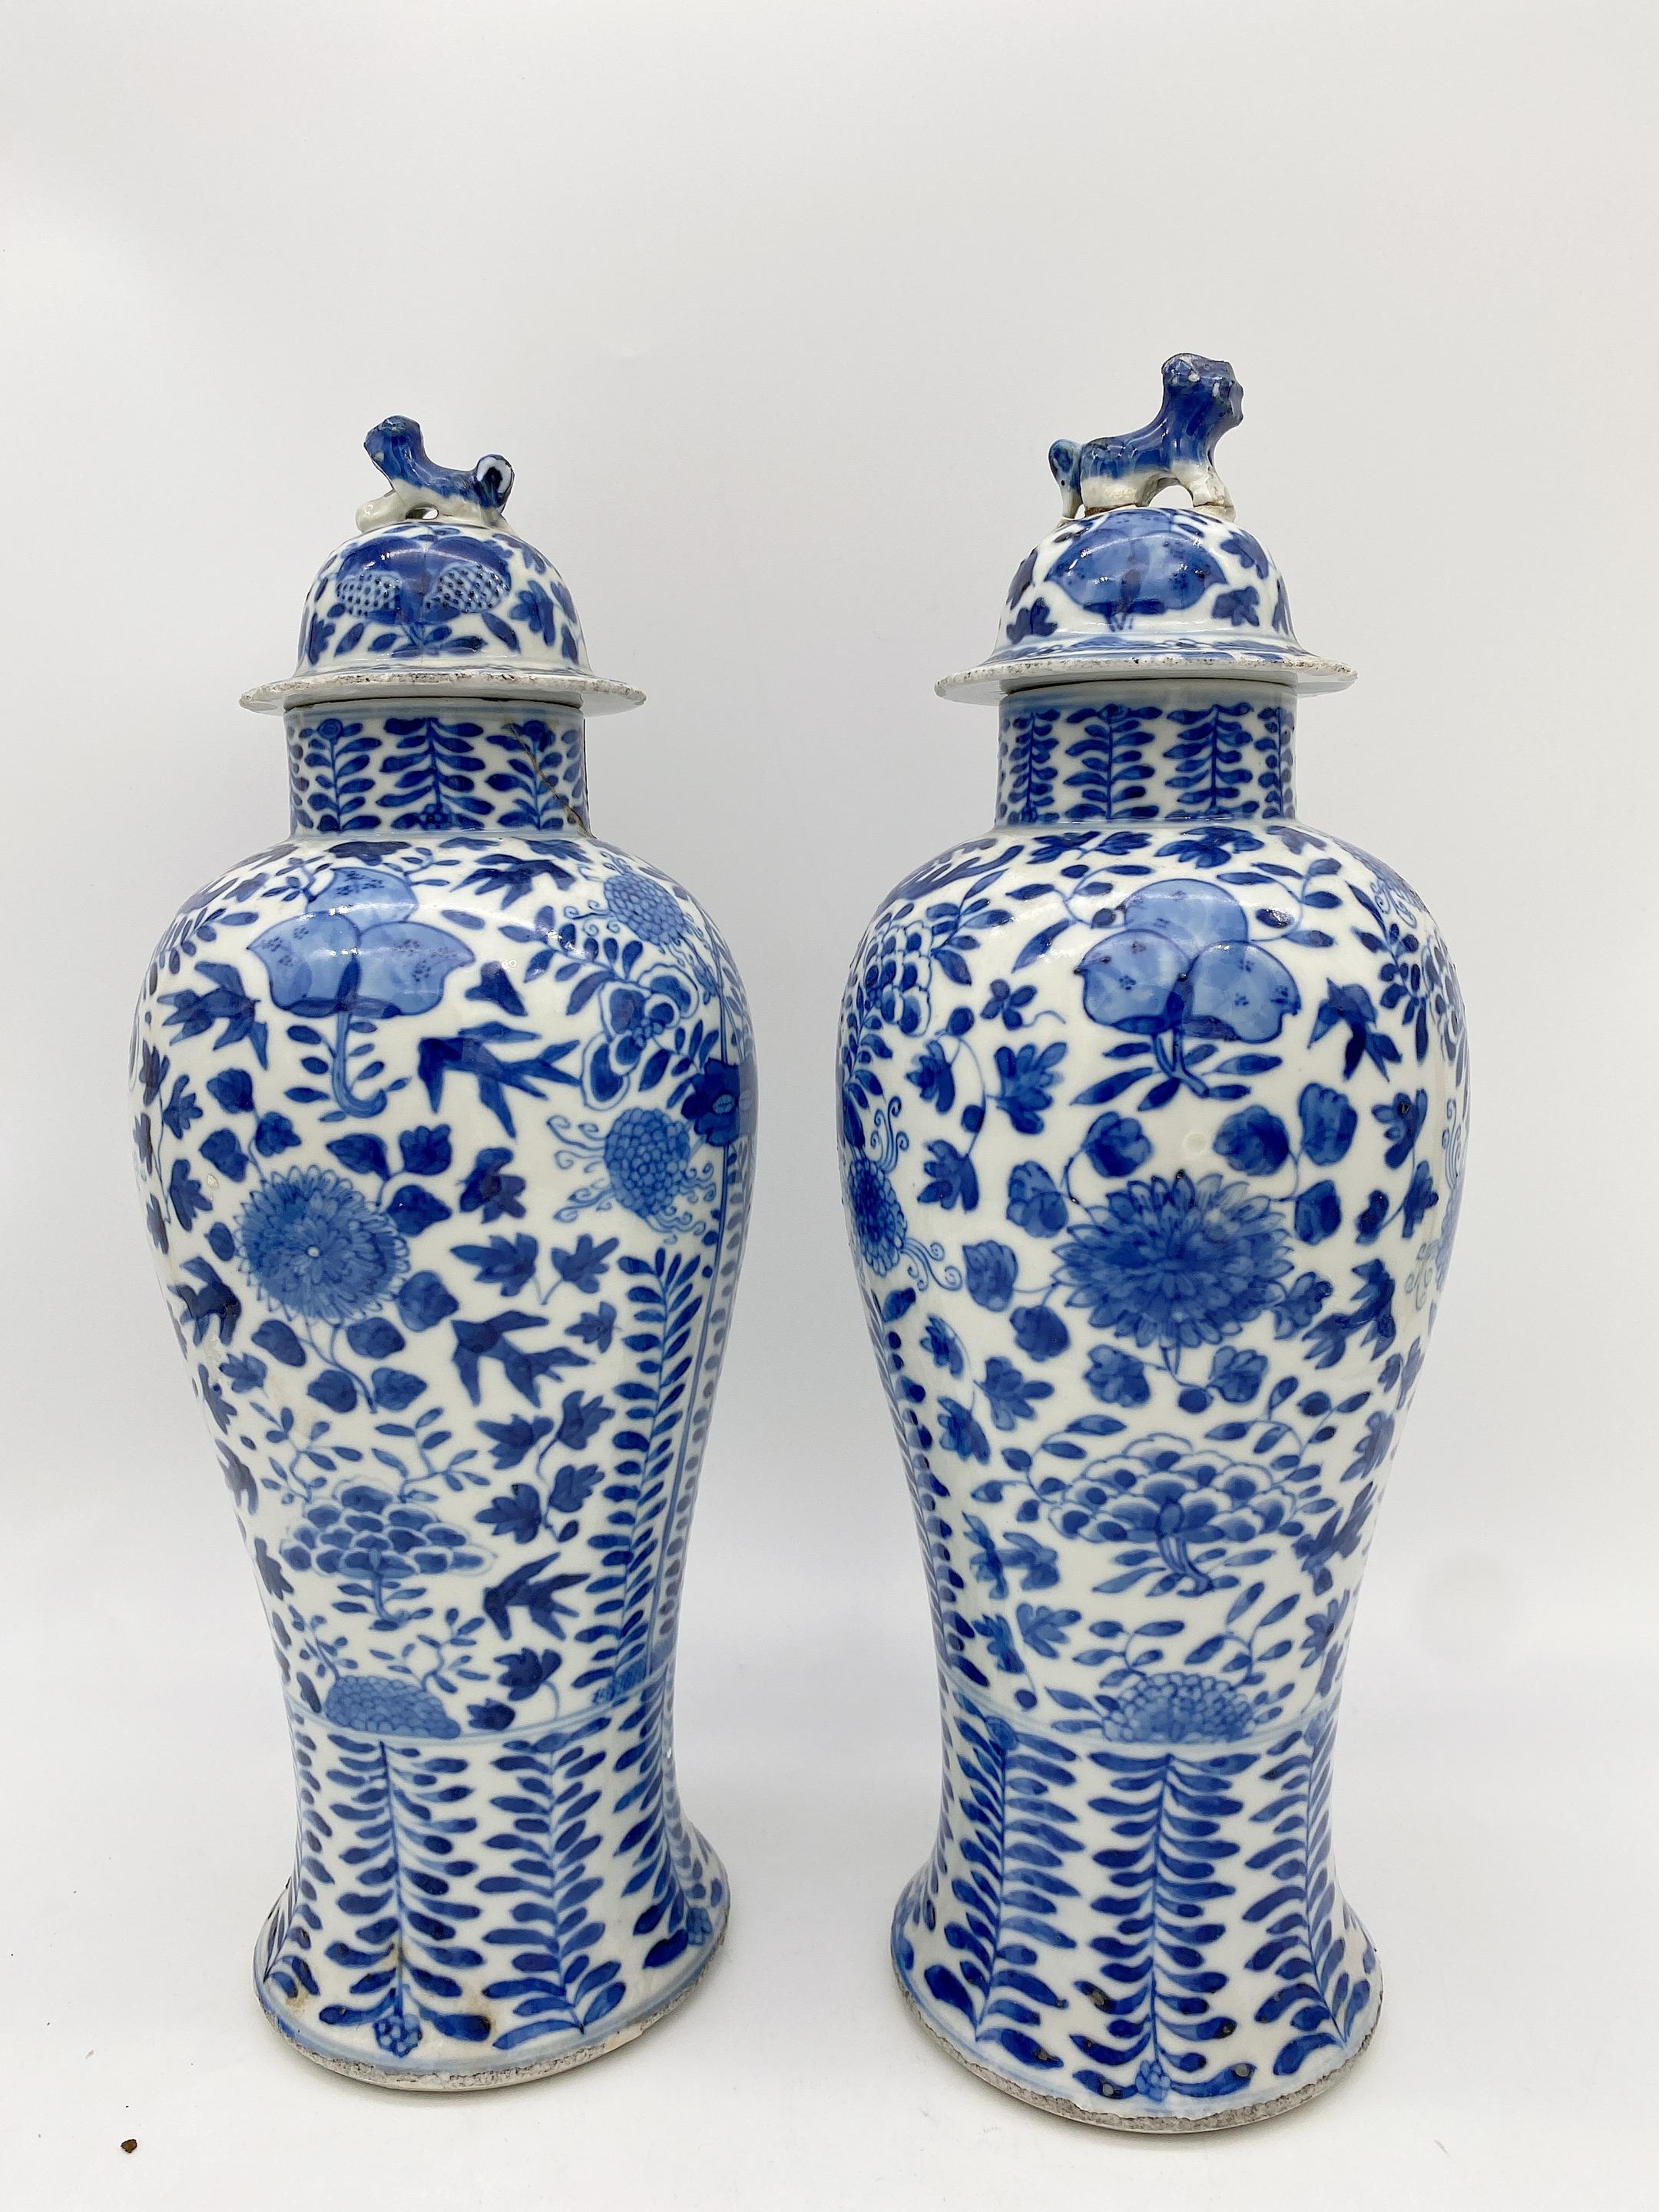 Qing Dynasty pair of antique 18th century Chinese blue and white porcelain jars and covers, 2 of five sacrificial utensils ,the lids with lions form finials overall decorated with fruit and branches, damages jars rim neck and covers, but when the